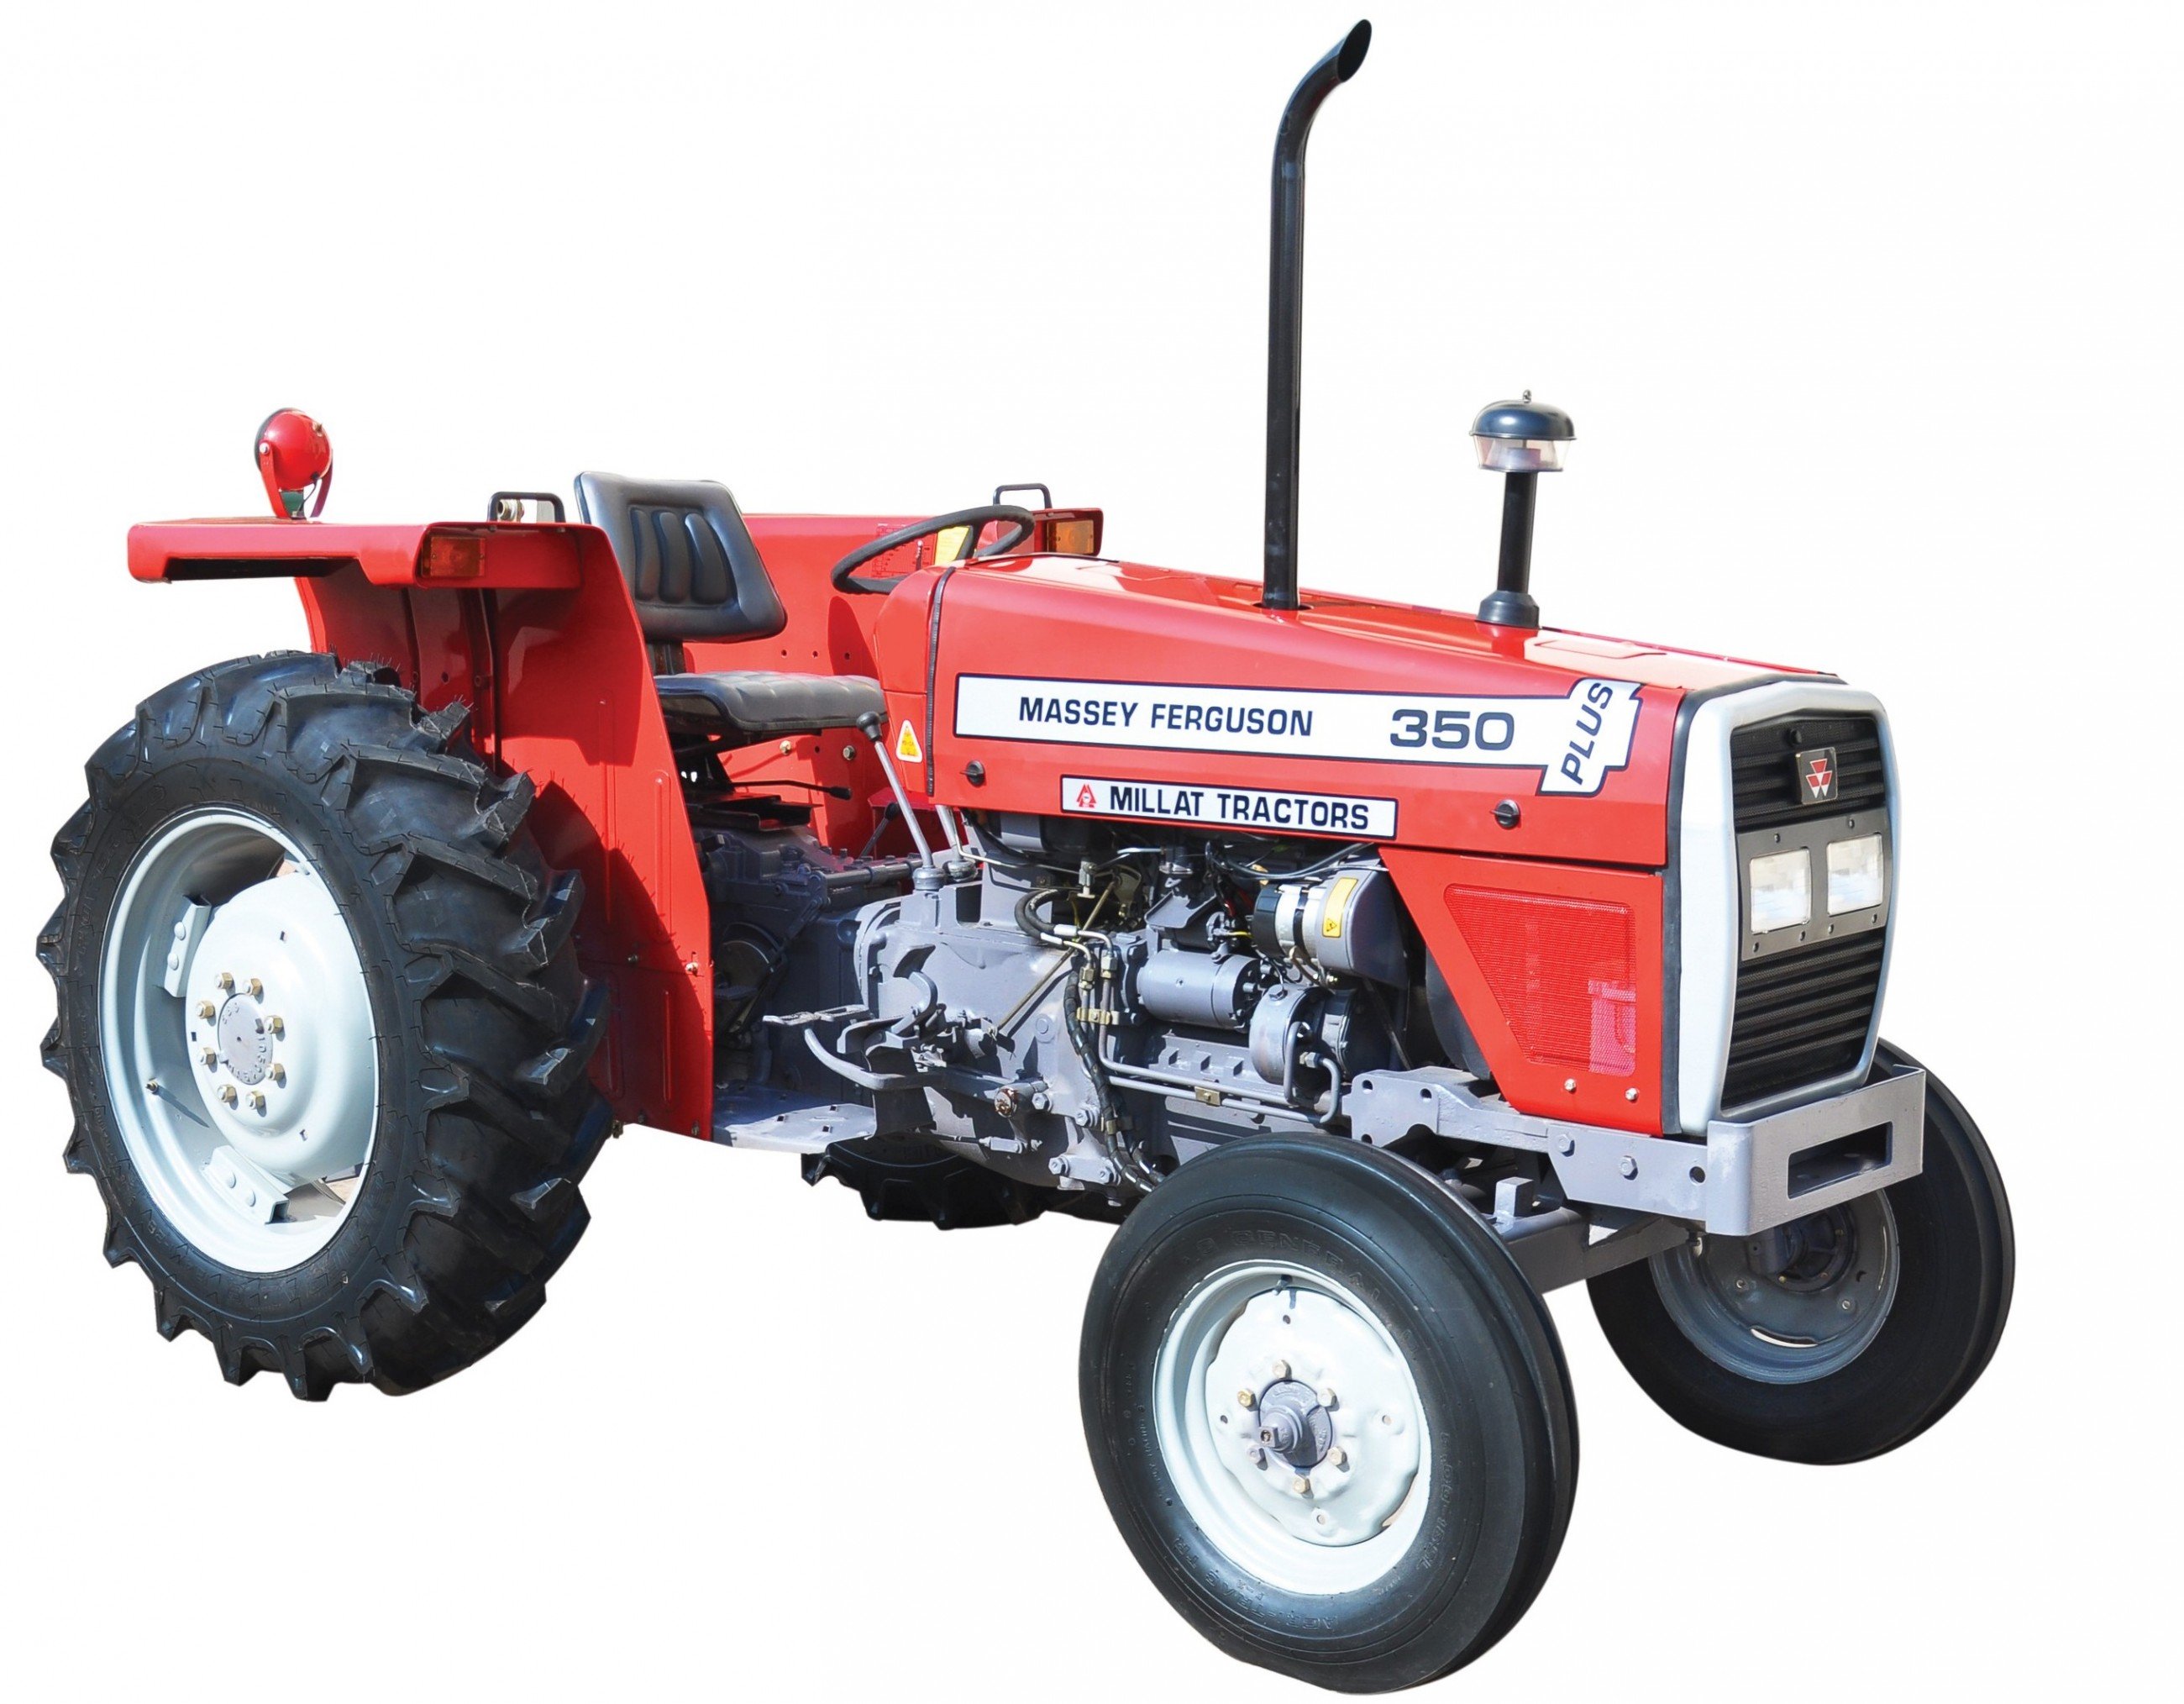 Massey Ferguson MF 350 Tractor Booking, Features, Pictures